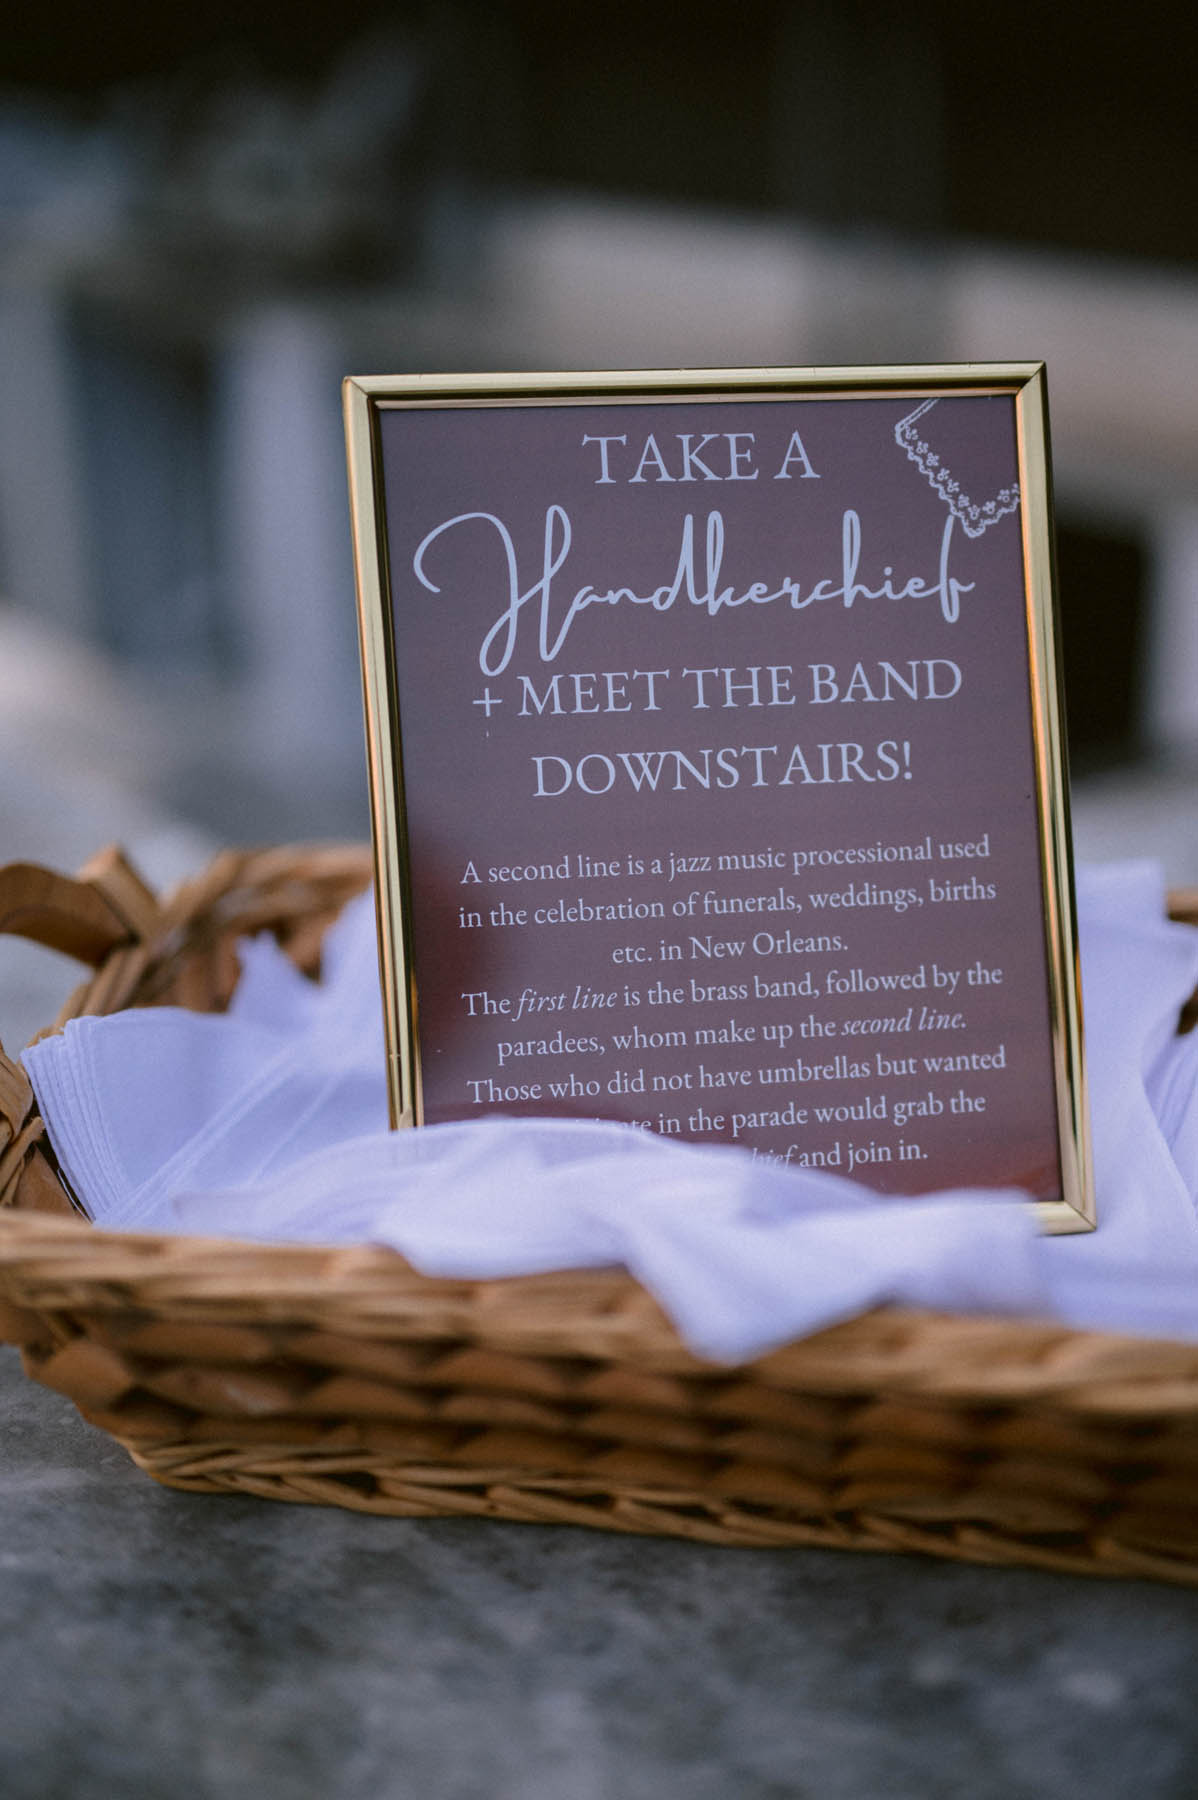 A gold frame sits in a basket of white handkerchief. The text inside reads: Take a handkerchief + meet the band downstairs! A second line is a jazz music processional used in the celebration of funerals, weddings, births, etc. in New Orleans. The first line is the brand band, followed by the paradees, whom make up the second line. Those who did not have umbrellas but wanted to participate in the parade would grab their handkerchief and join in. 